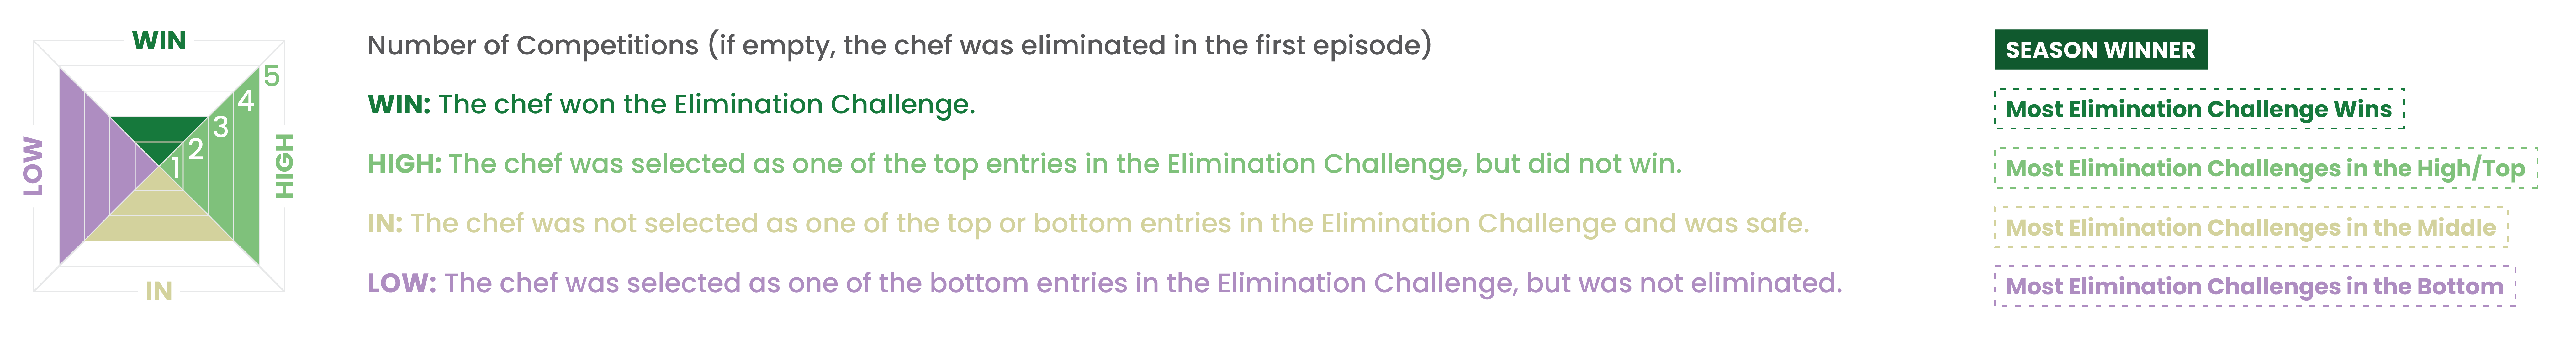 infographic with cones of data showing top chef elimination numbers